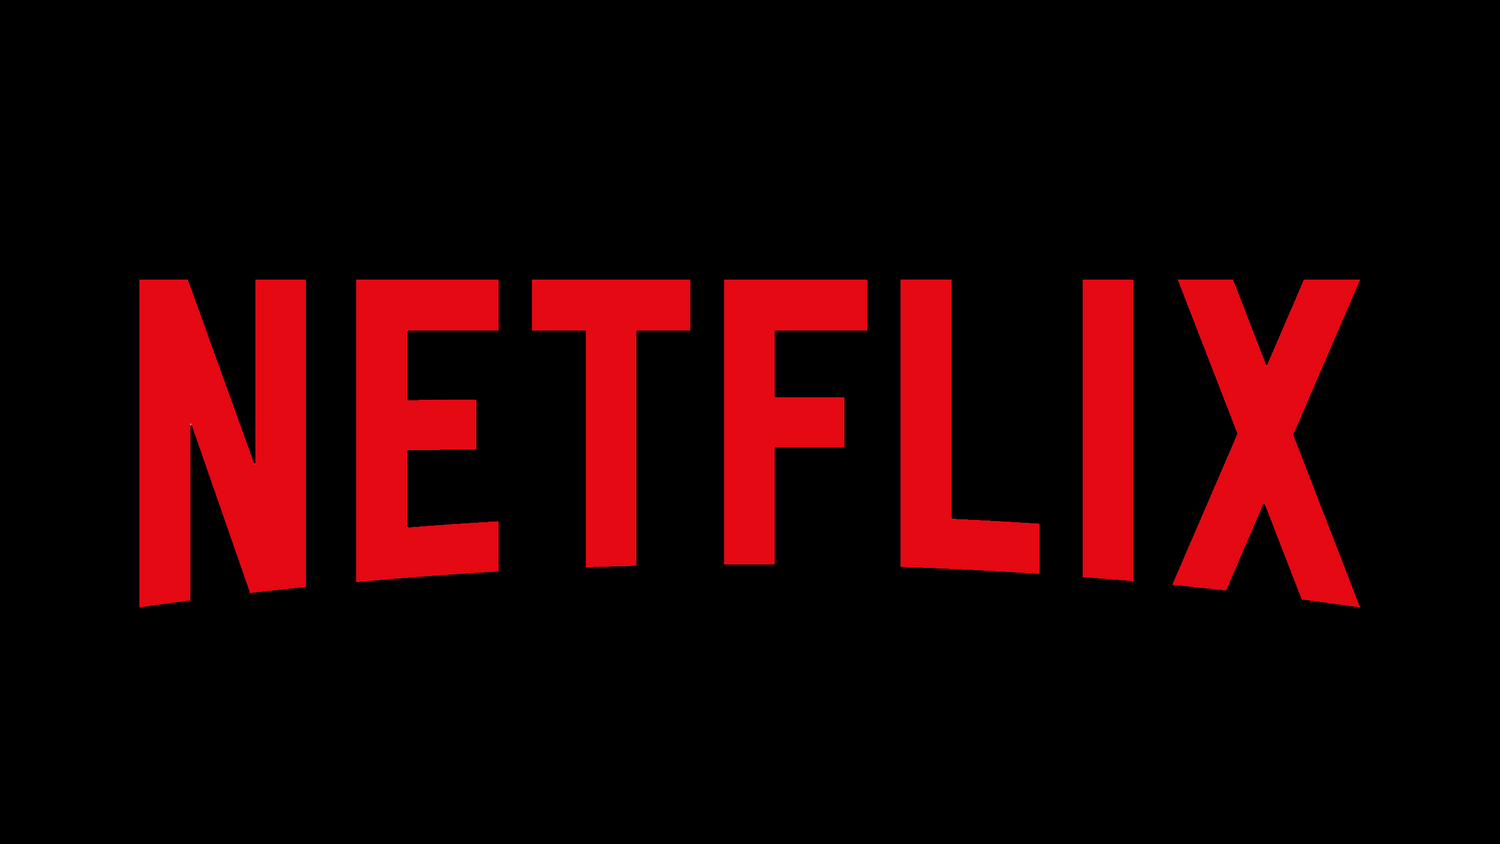 Netflix is looking to expand into video games